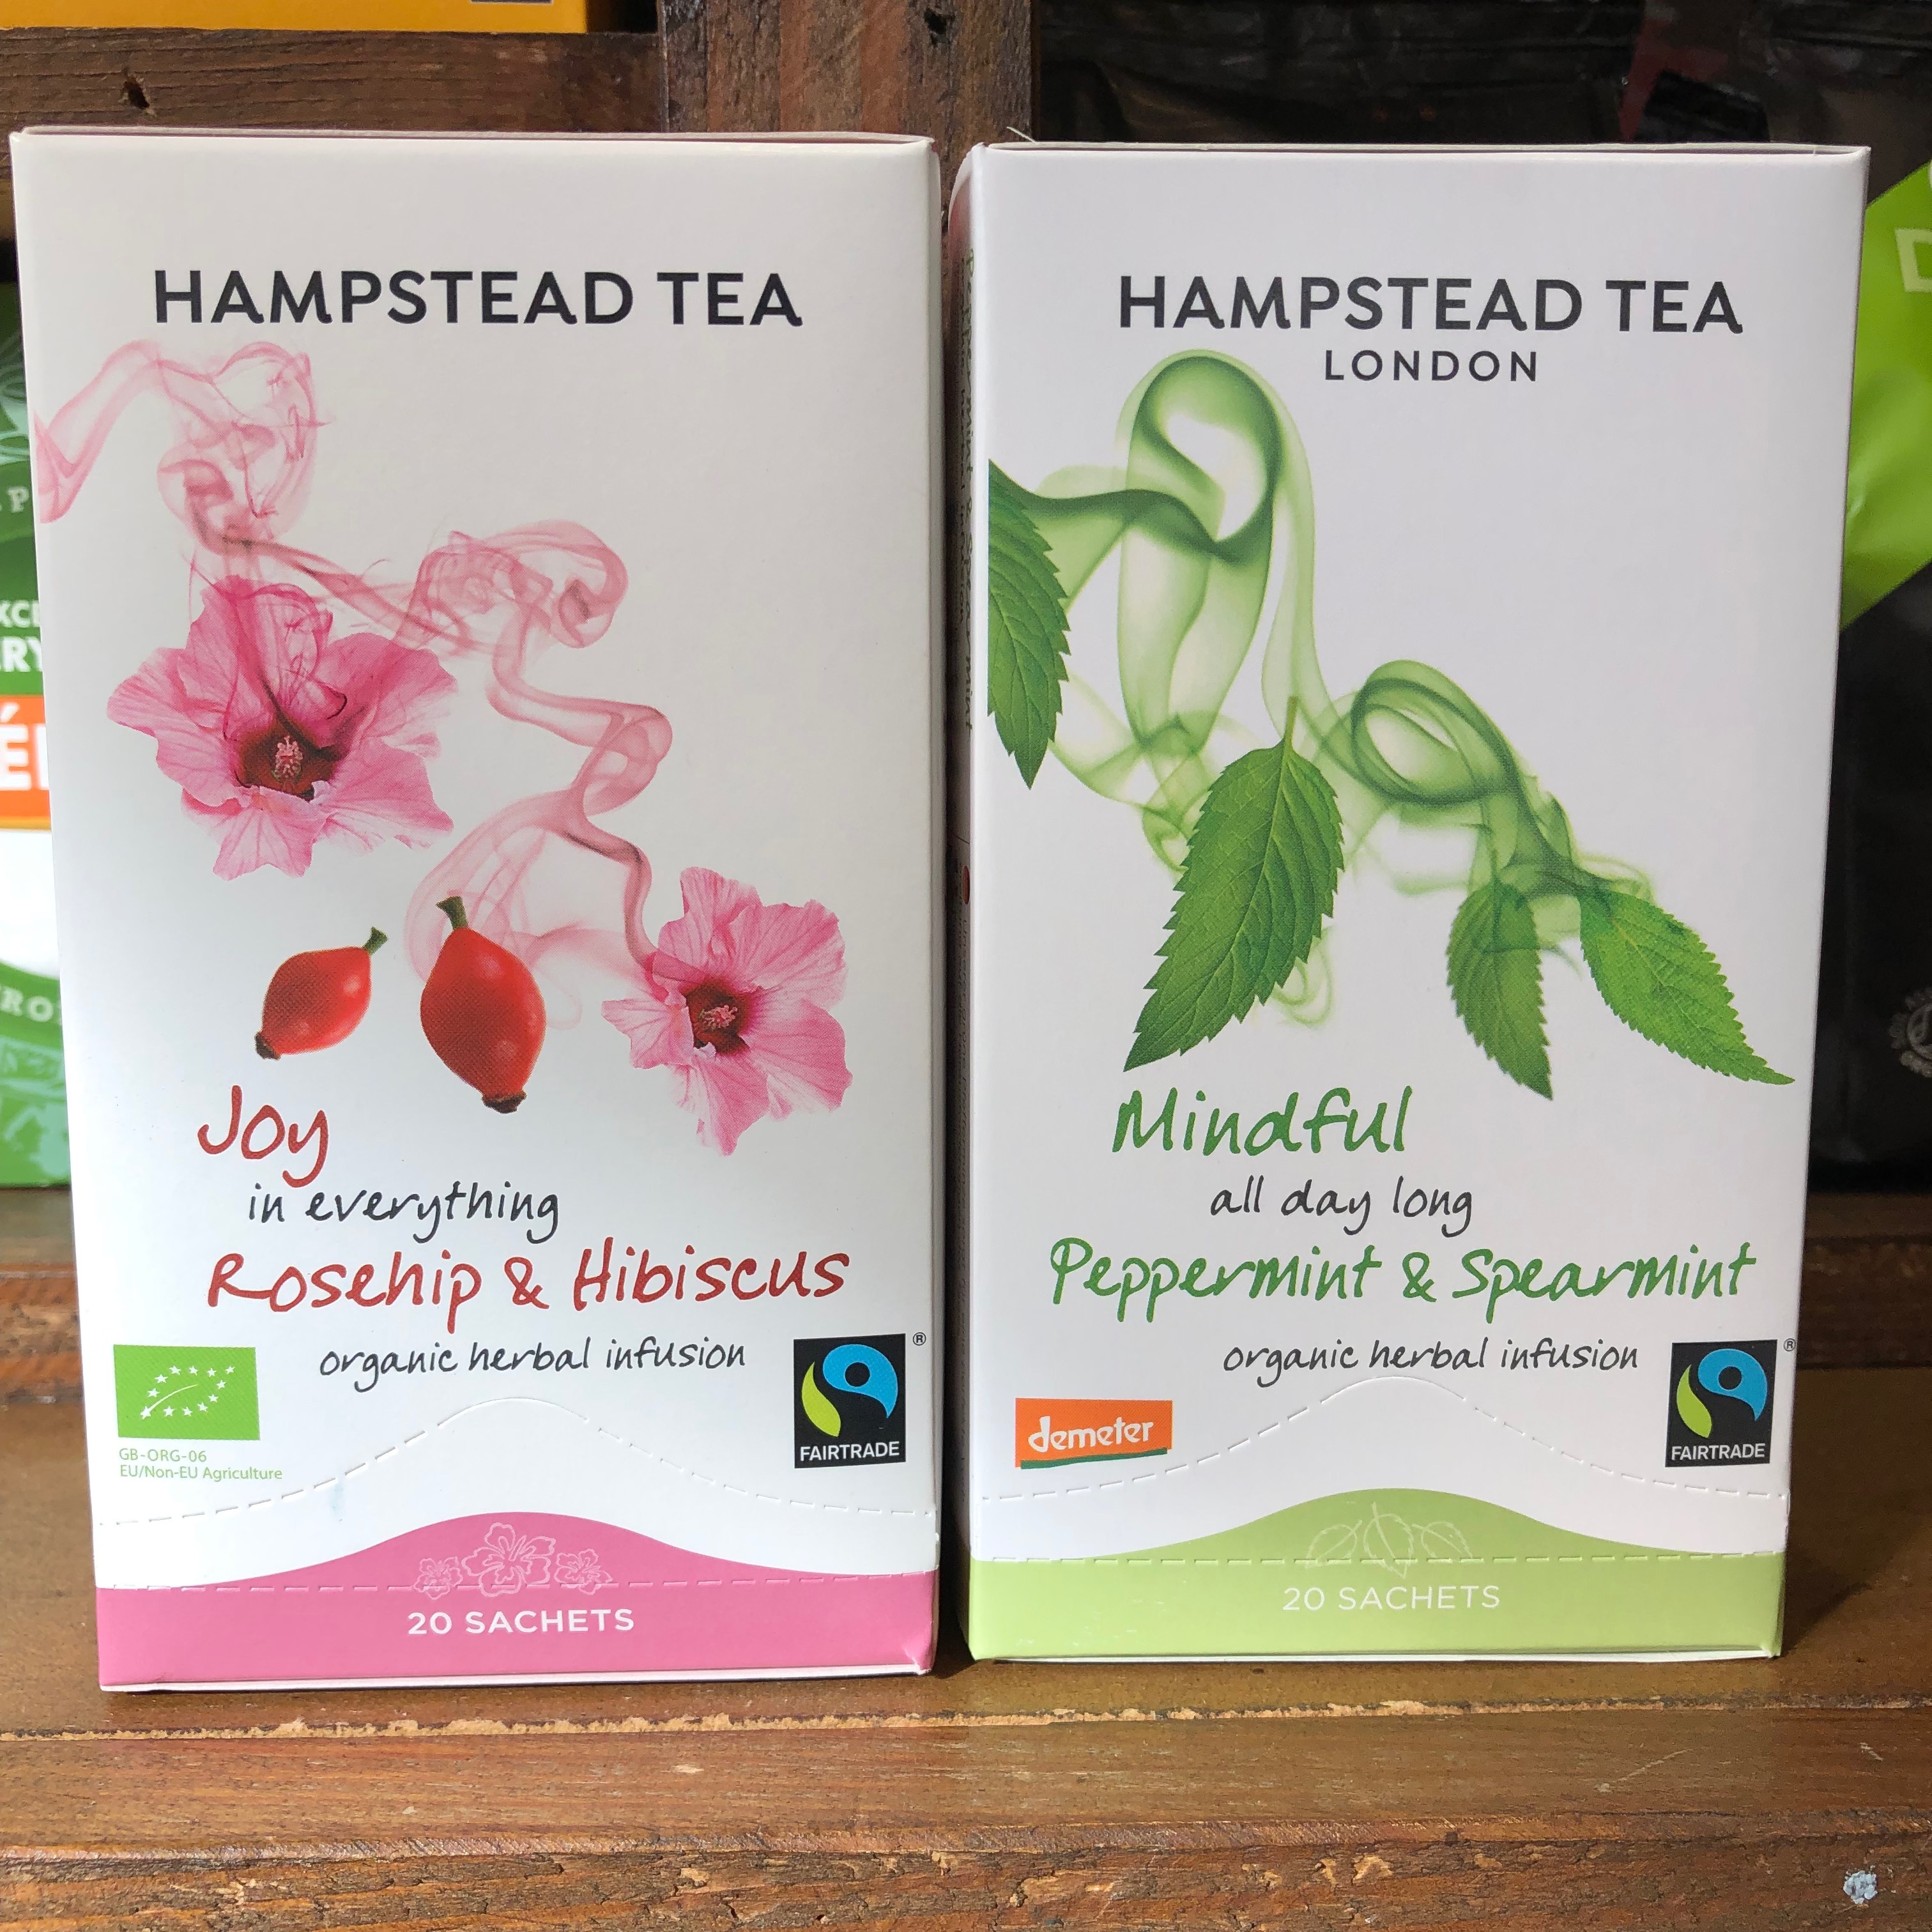 Hampstead boxes of rosehip & hibiscus and Peppermint & spearmint tea bags